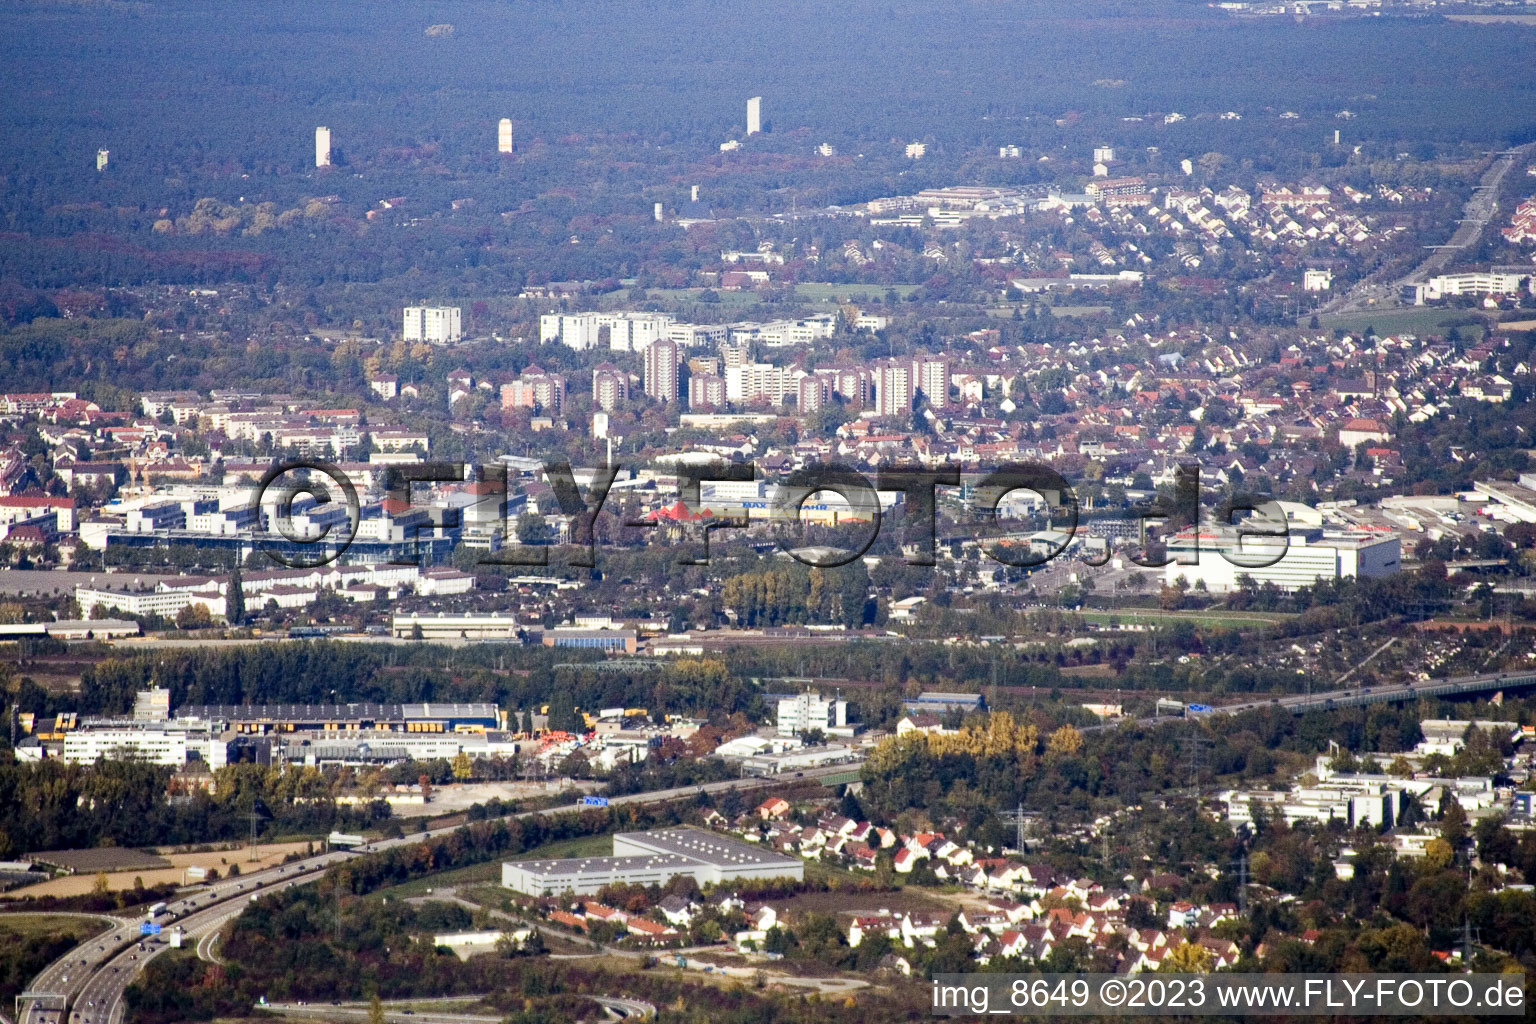 District Oststadt in Karlsruhe in the state Baden-Wuerttemberg, Germany from the drone perspective